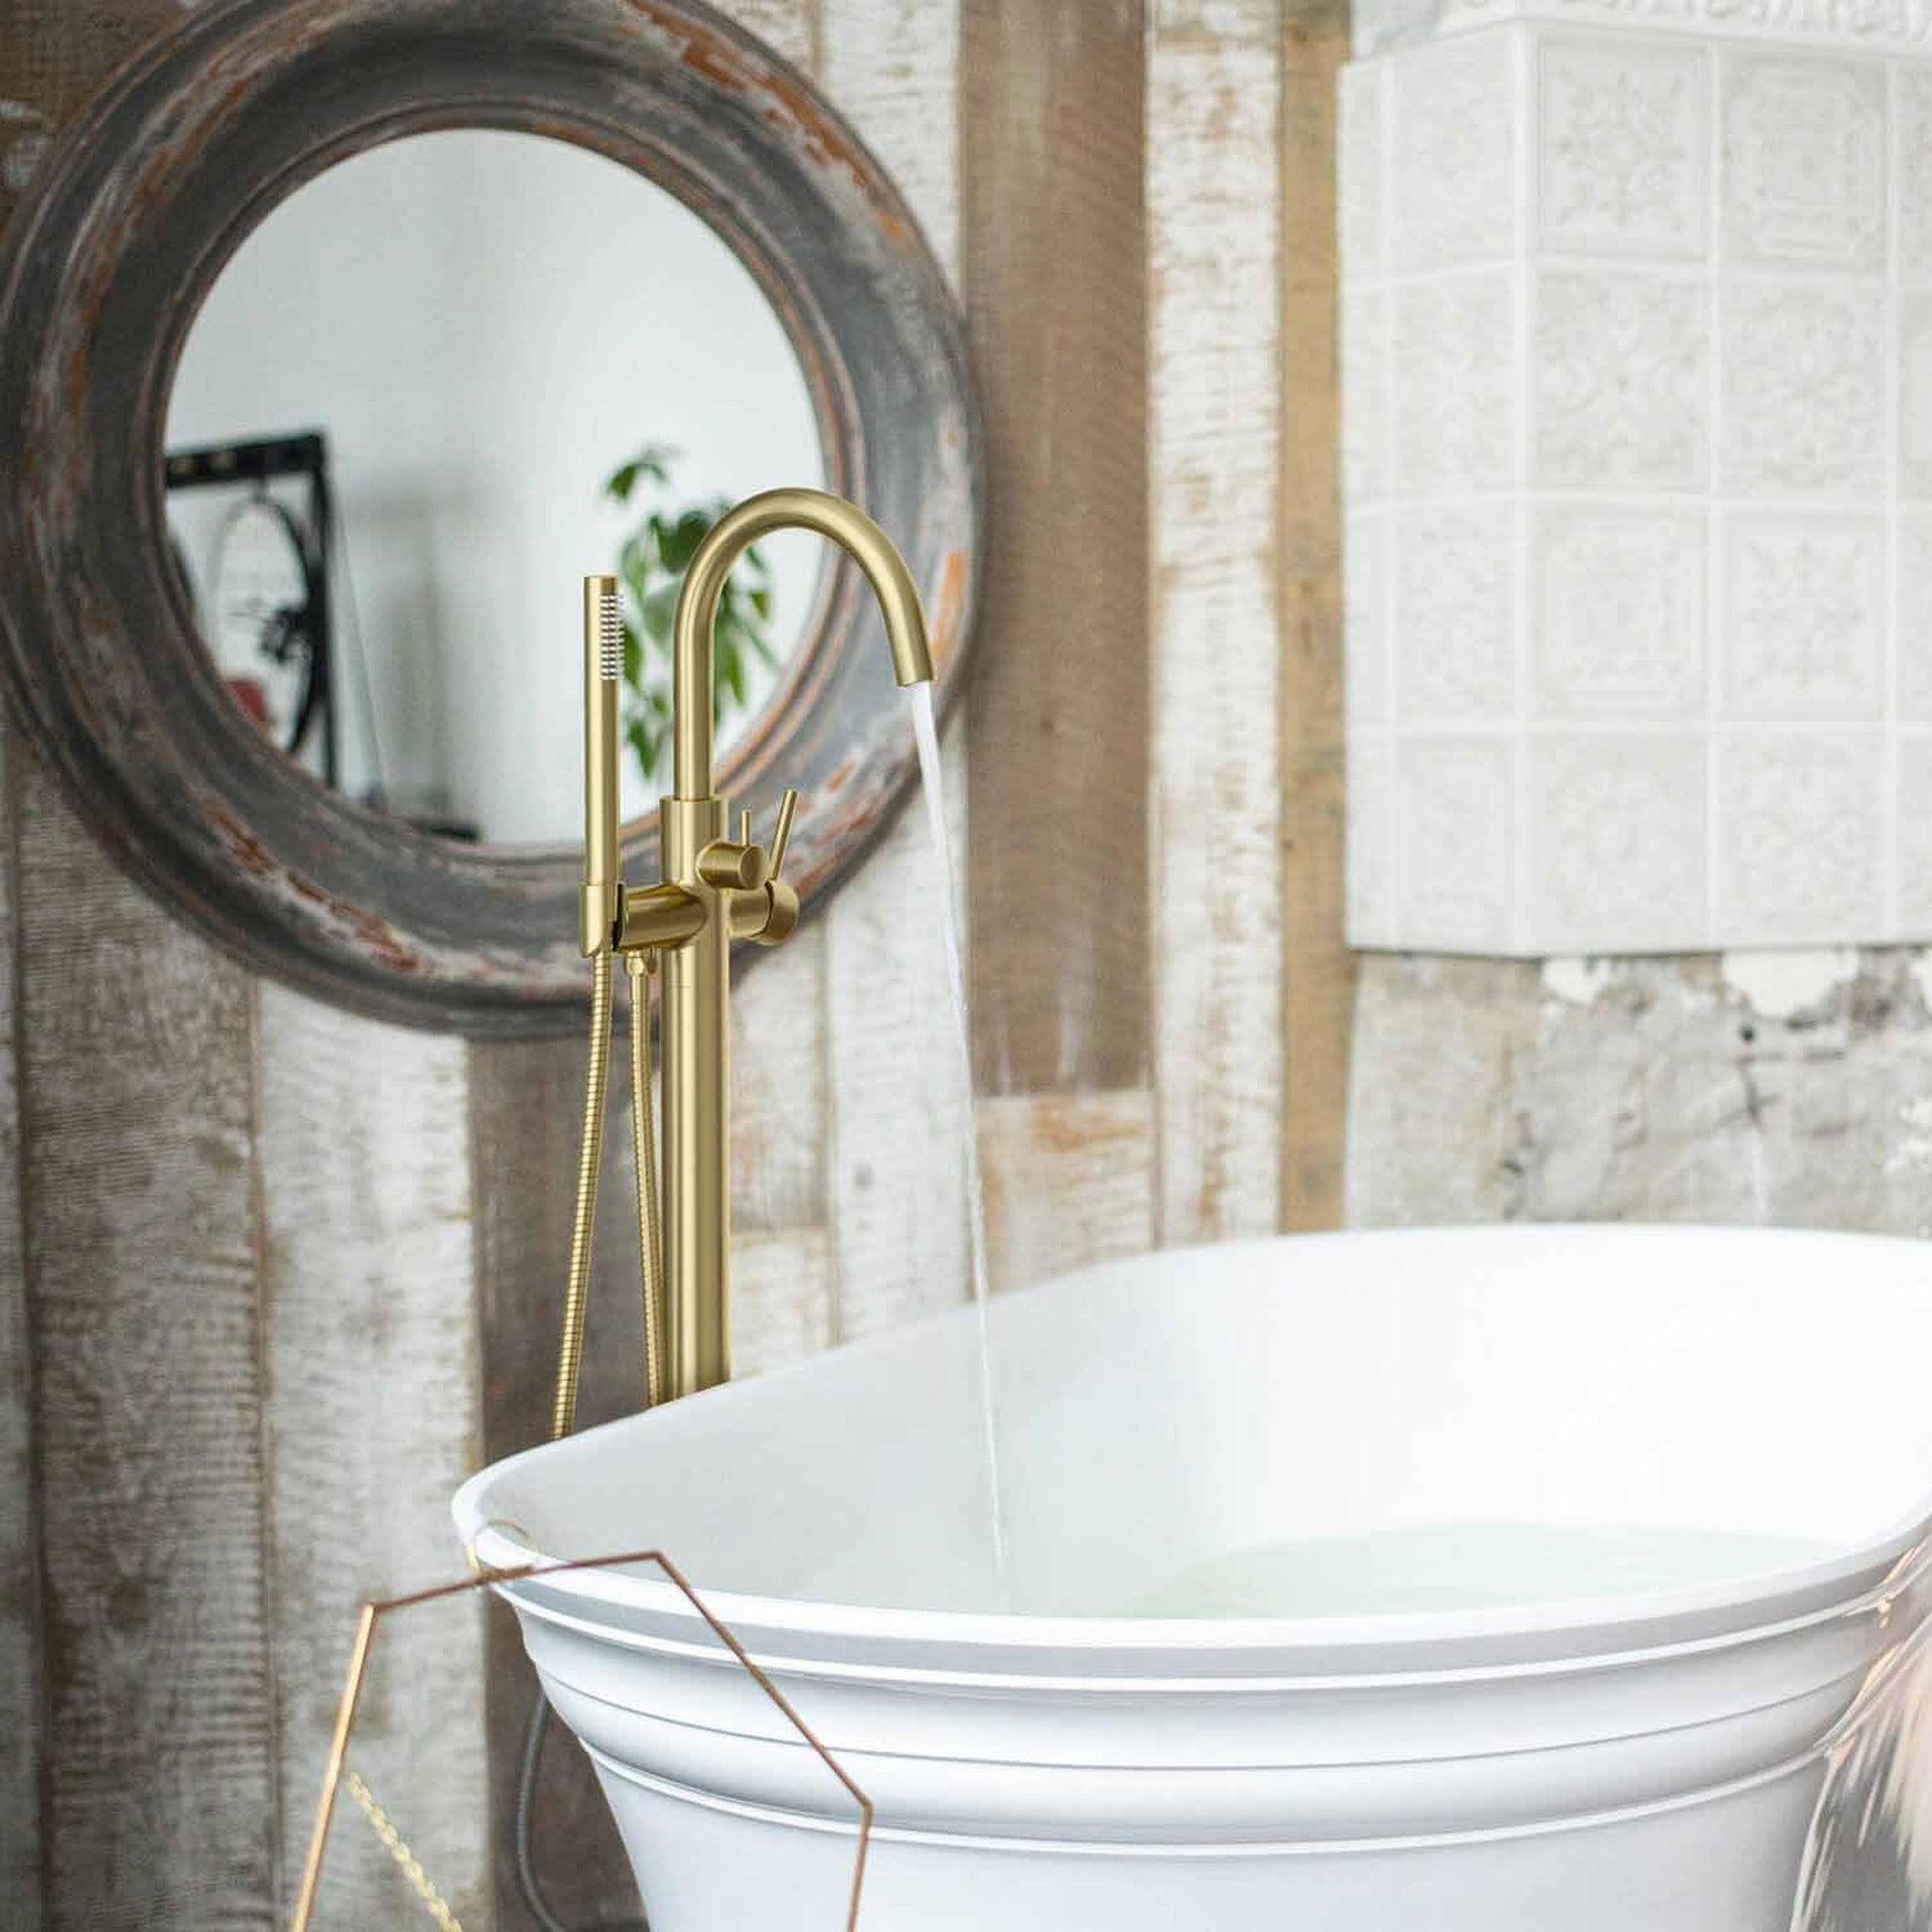 KIBI Circular Brass Single Handle Floor Mounted Freestanding Tub Filler With Hand Shower in Brushed Gold Finish